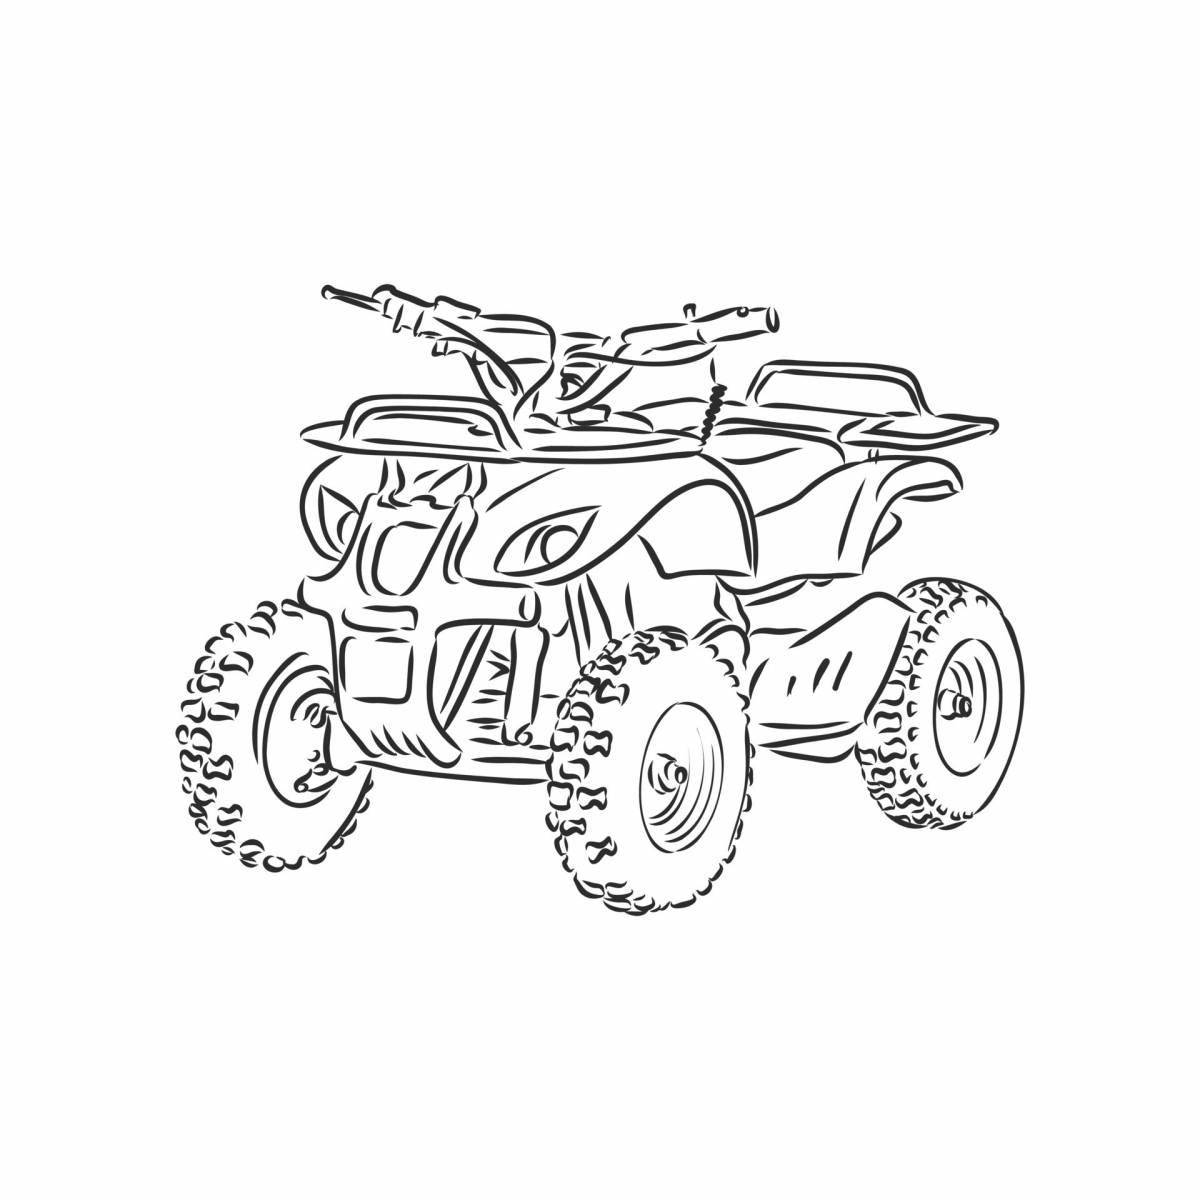 Coloring book for kids on quad bikes